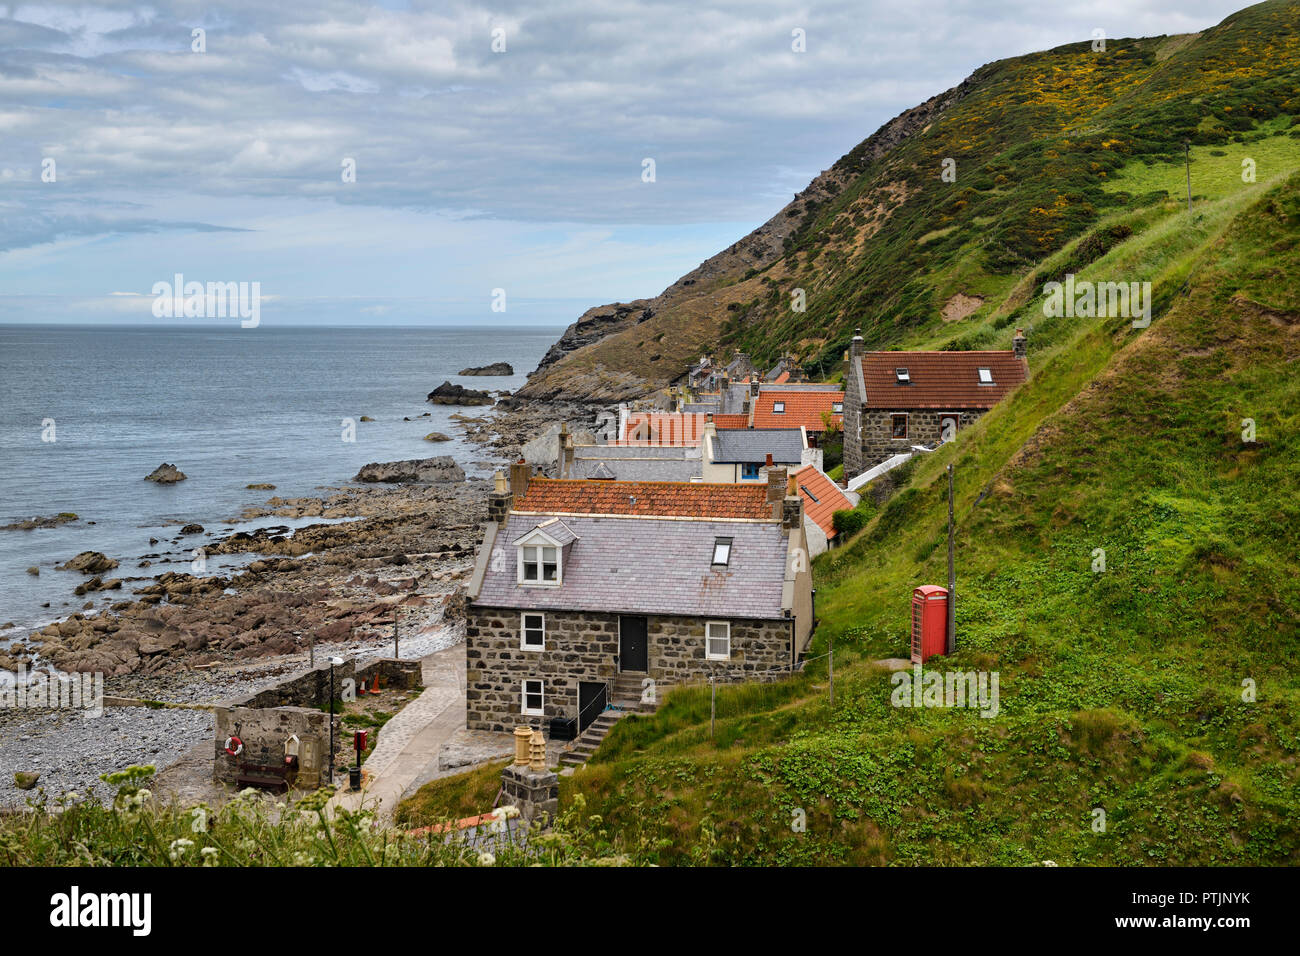 Single row of houses of Crovie coastal fishing village on Gamrie Bay North Sea Aberdeenshire Scotland UK with red telephone box Stock Photo